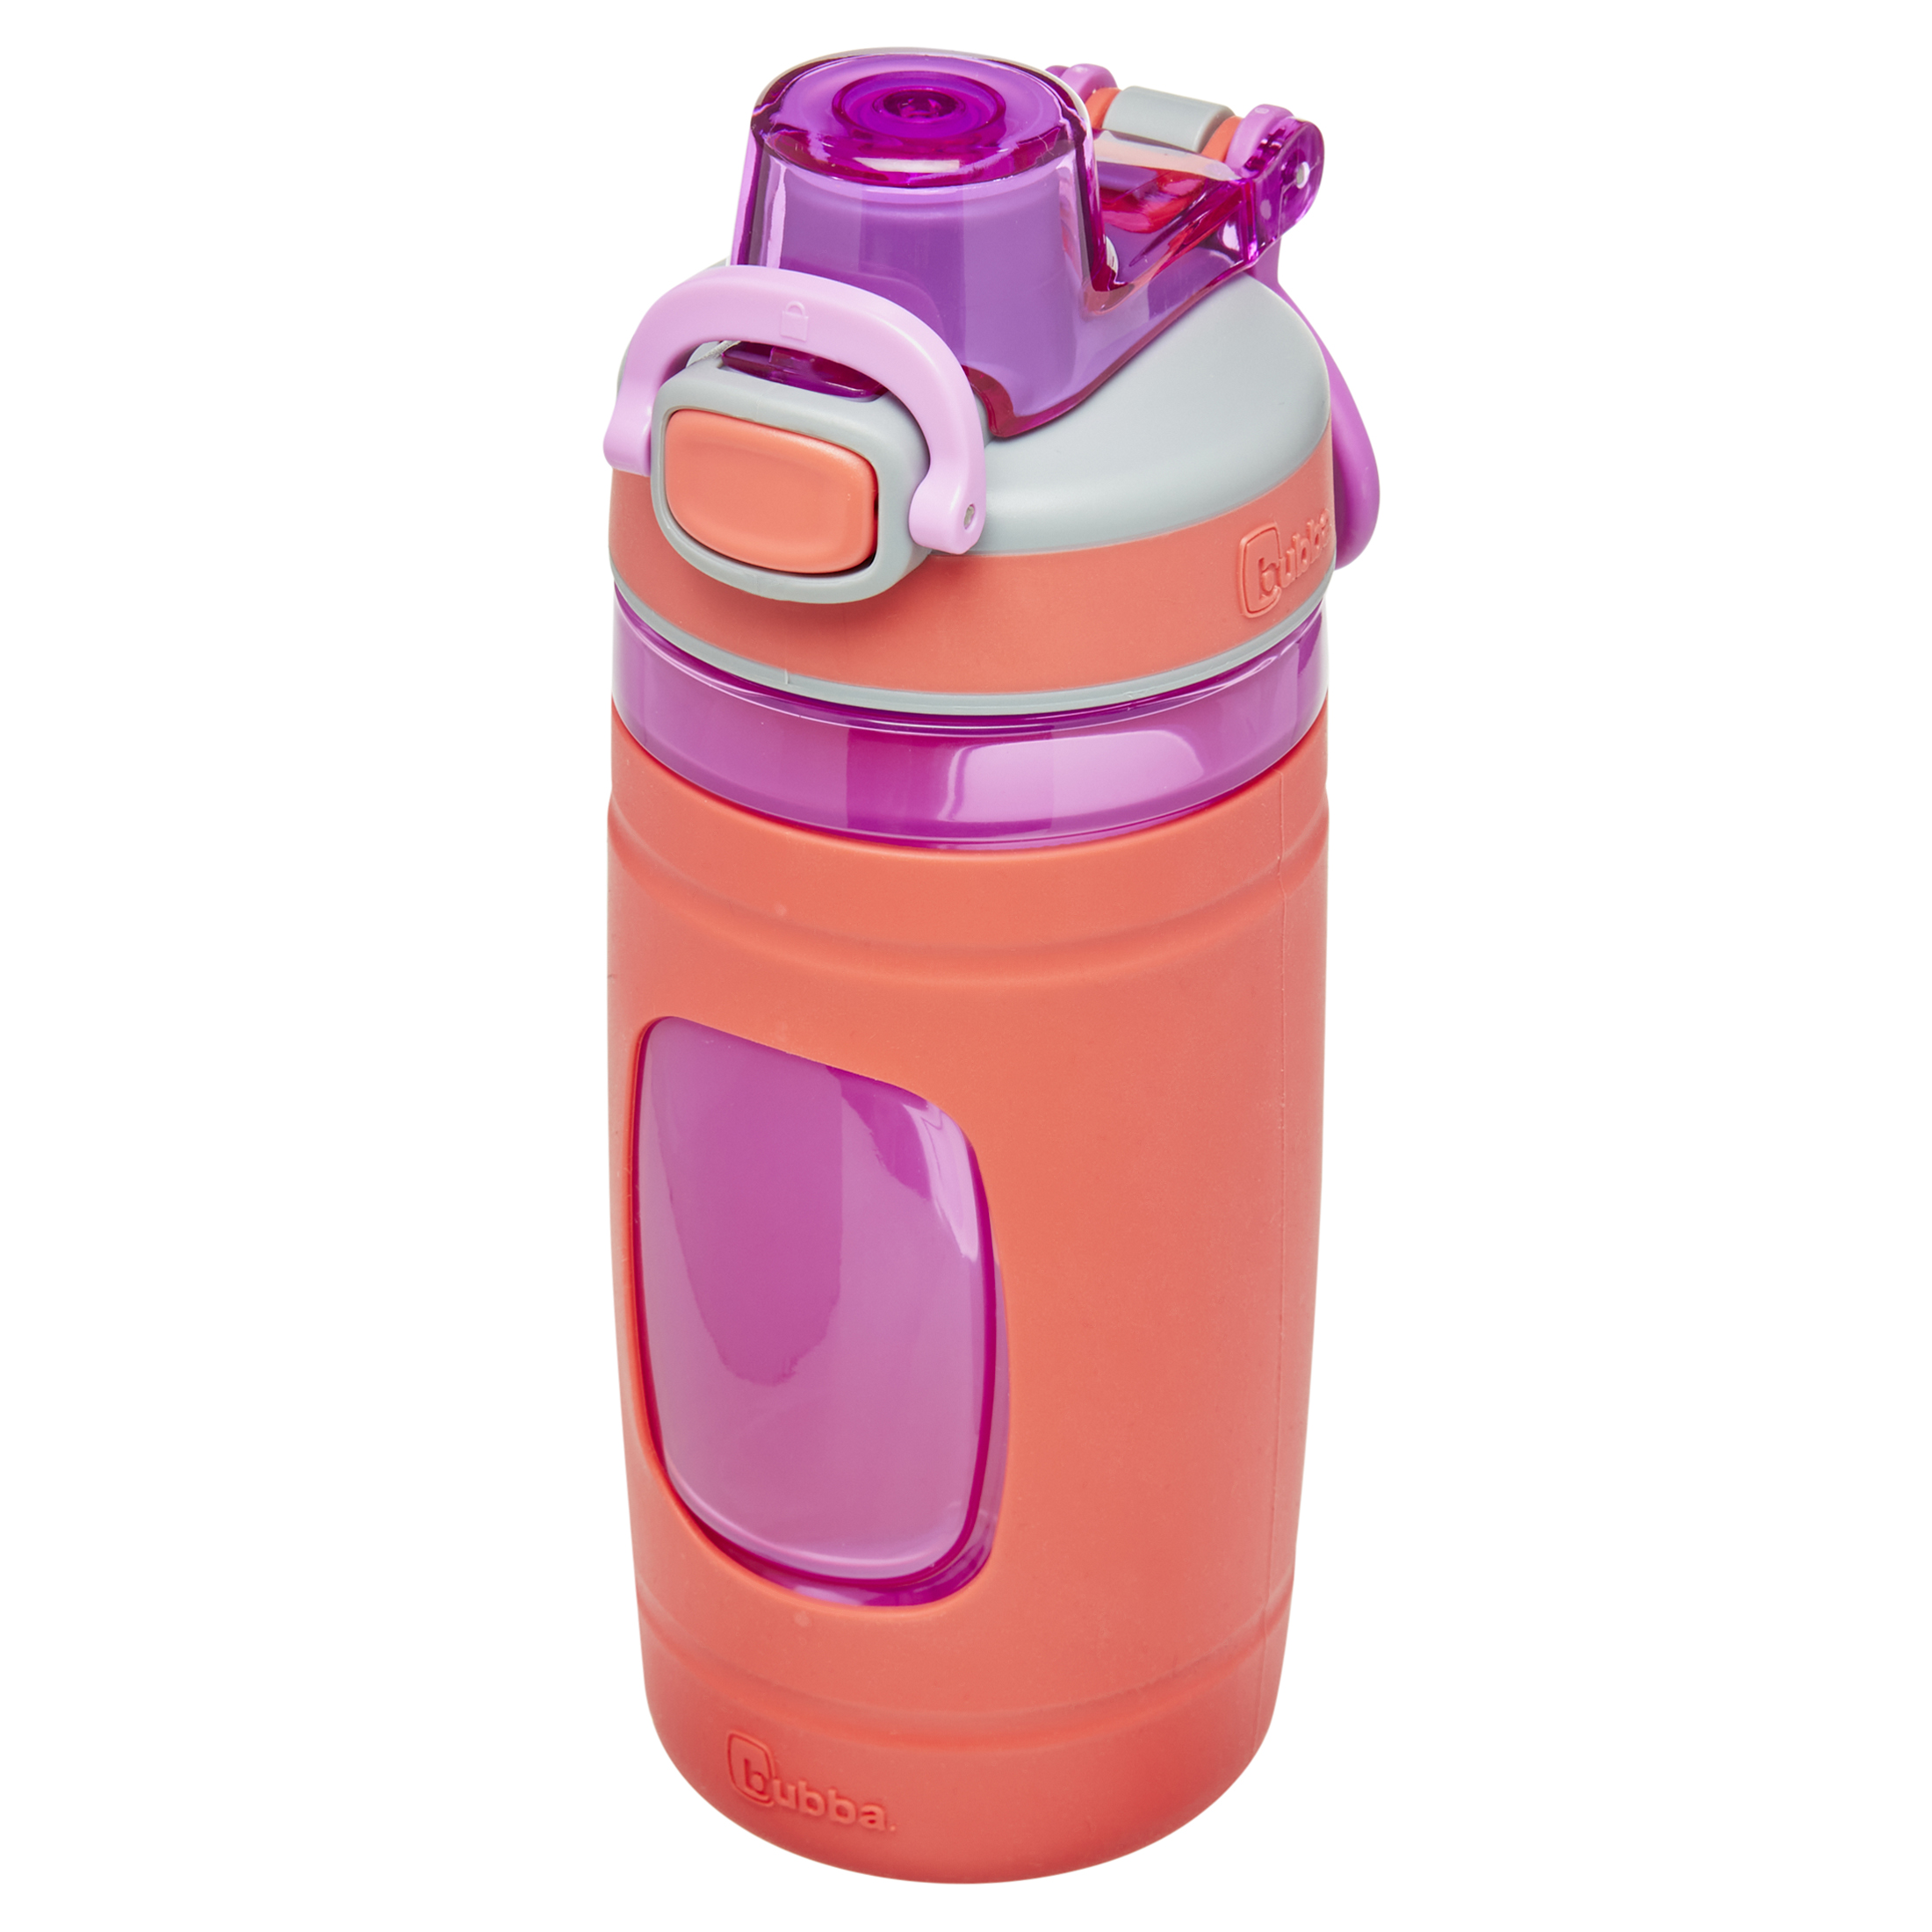 bubba Flo Kids Water Bottle Wide Mouth Lid with Silicone Sleeve Coral, 16 fl oz. - image 5 of 7